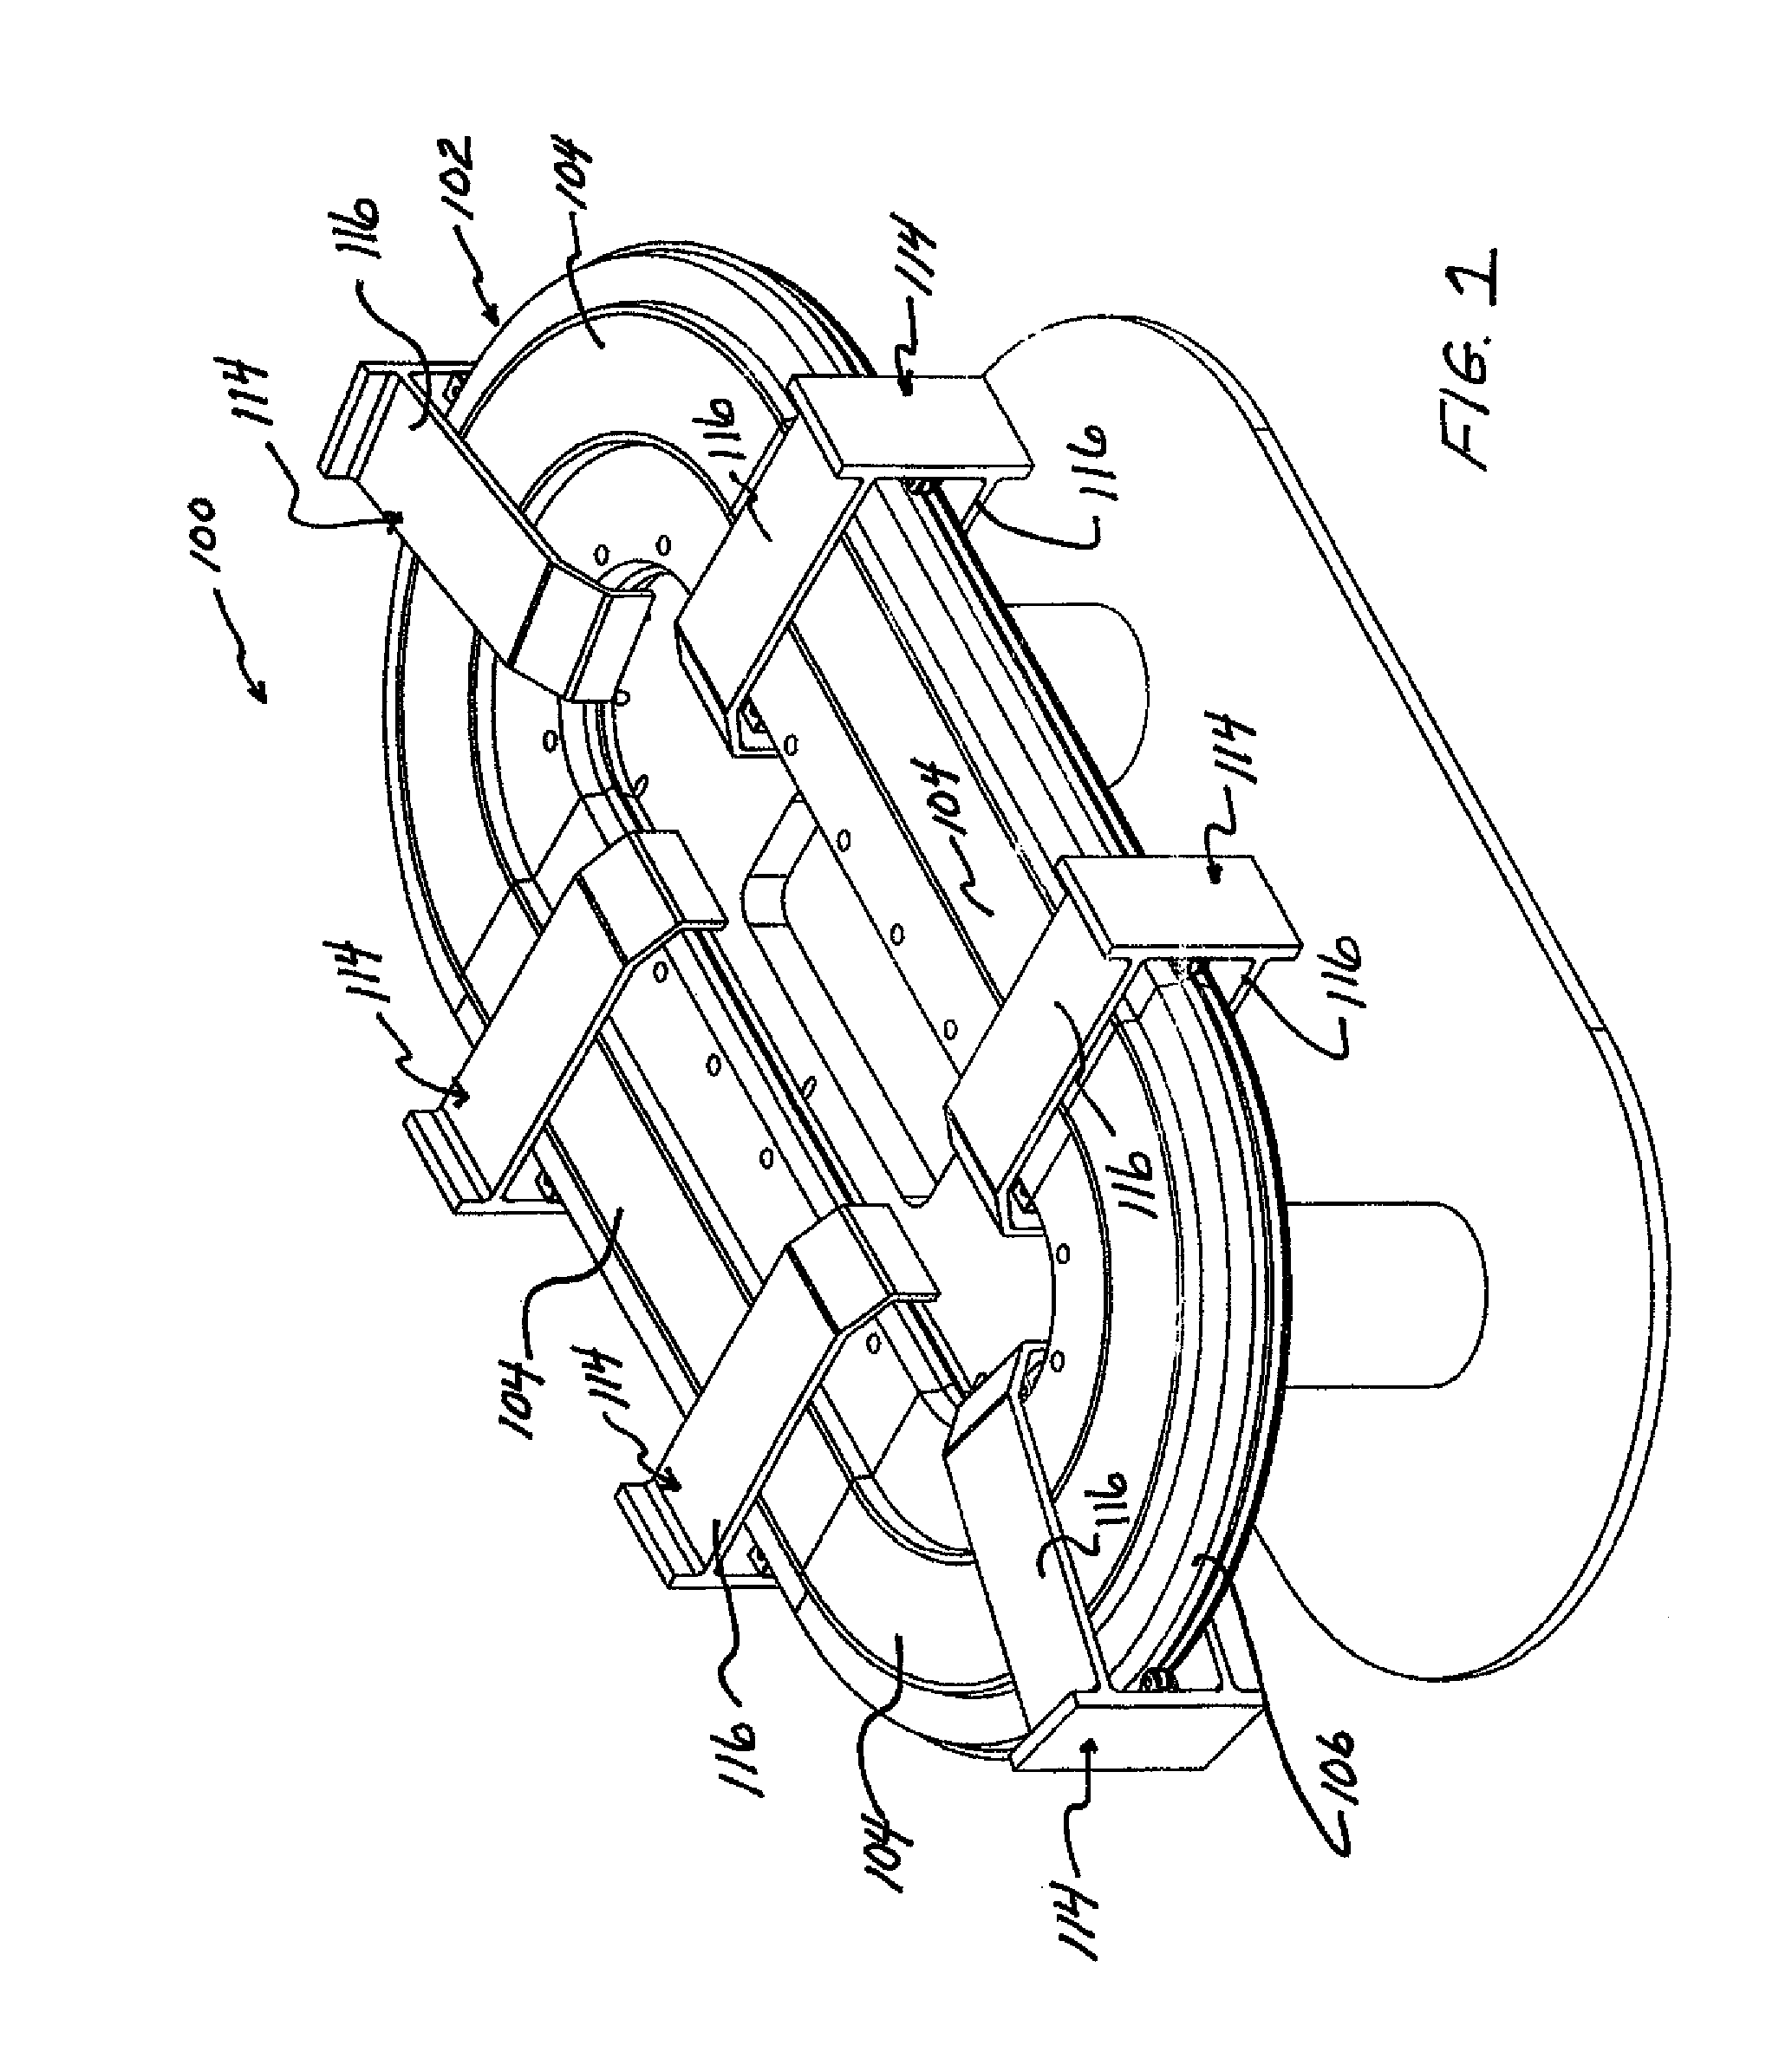 Packaging system and method utilizing intelligent conveyor systems